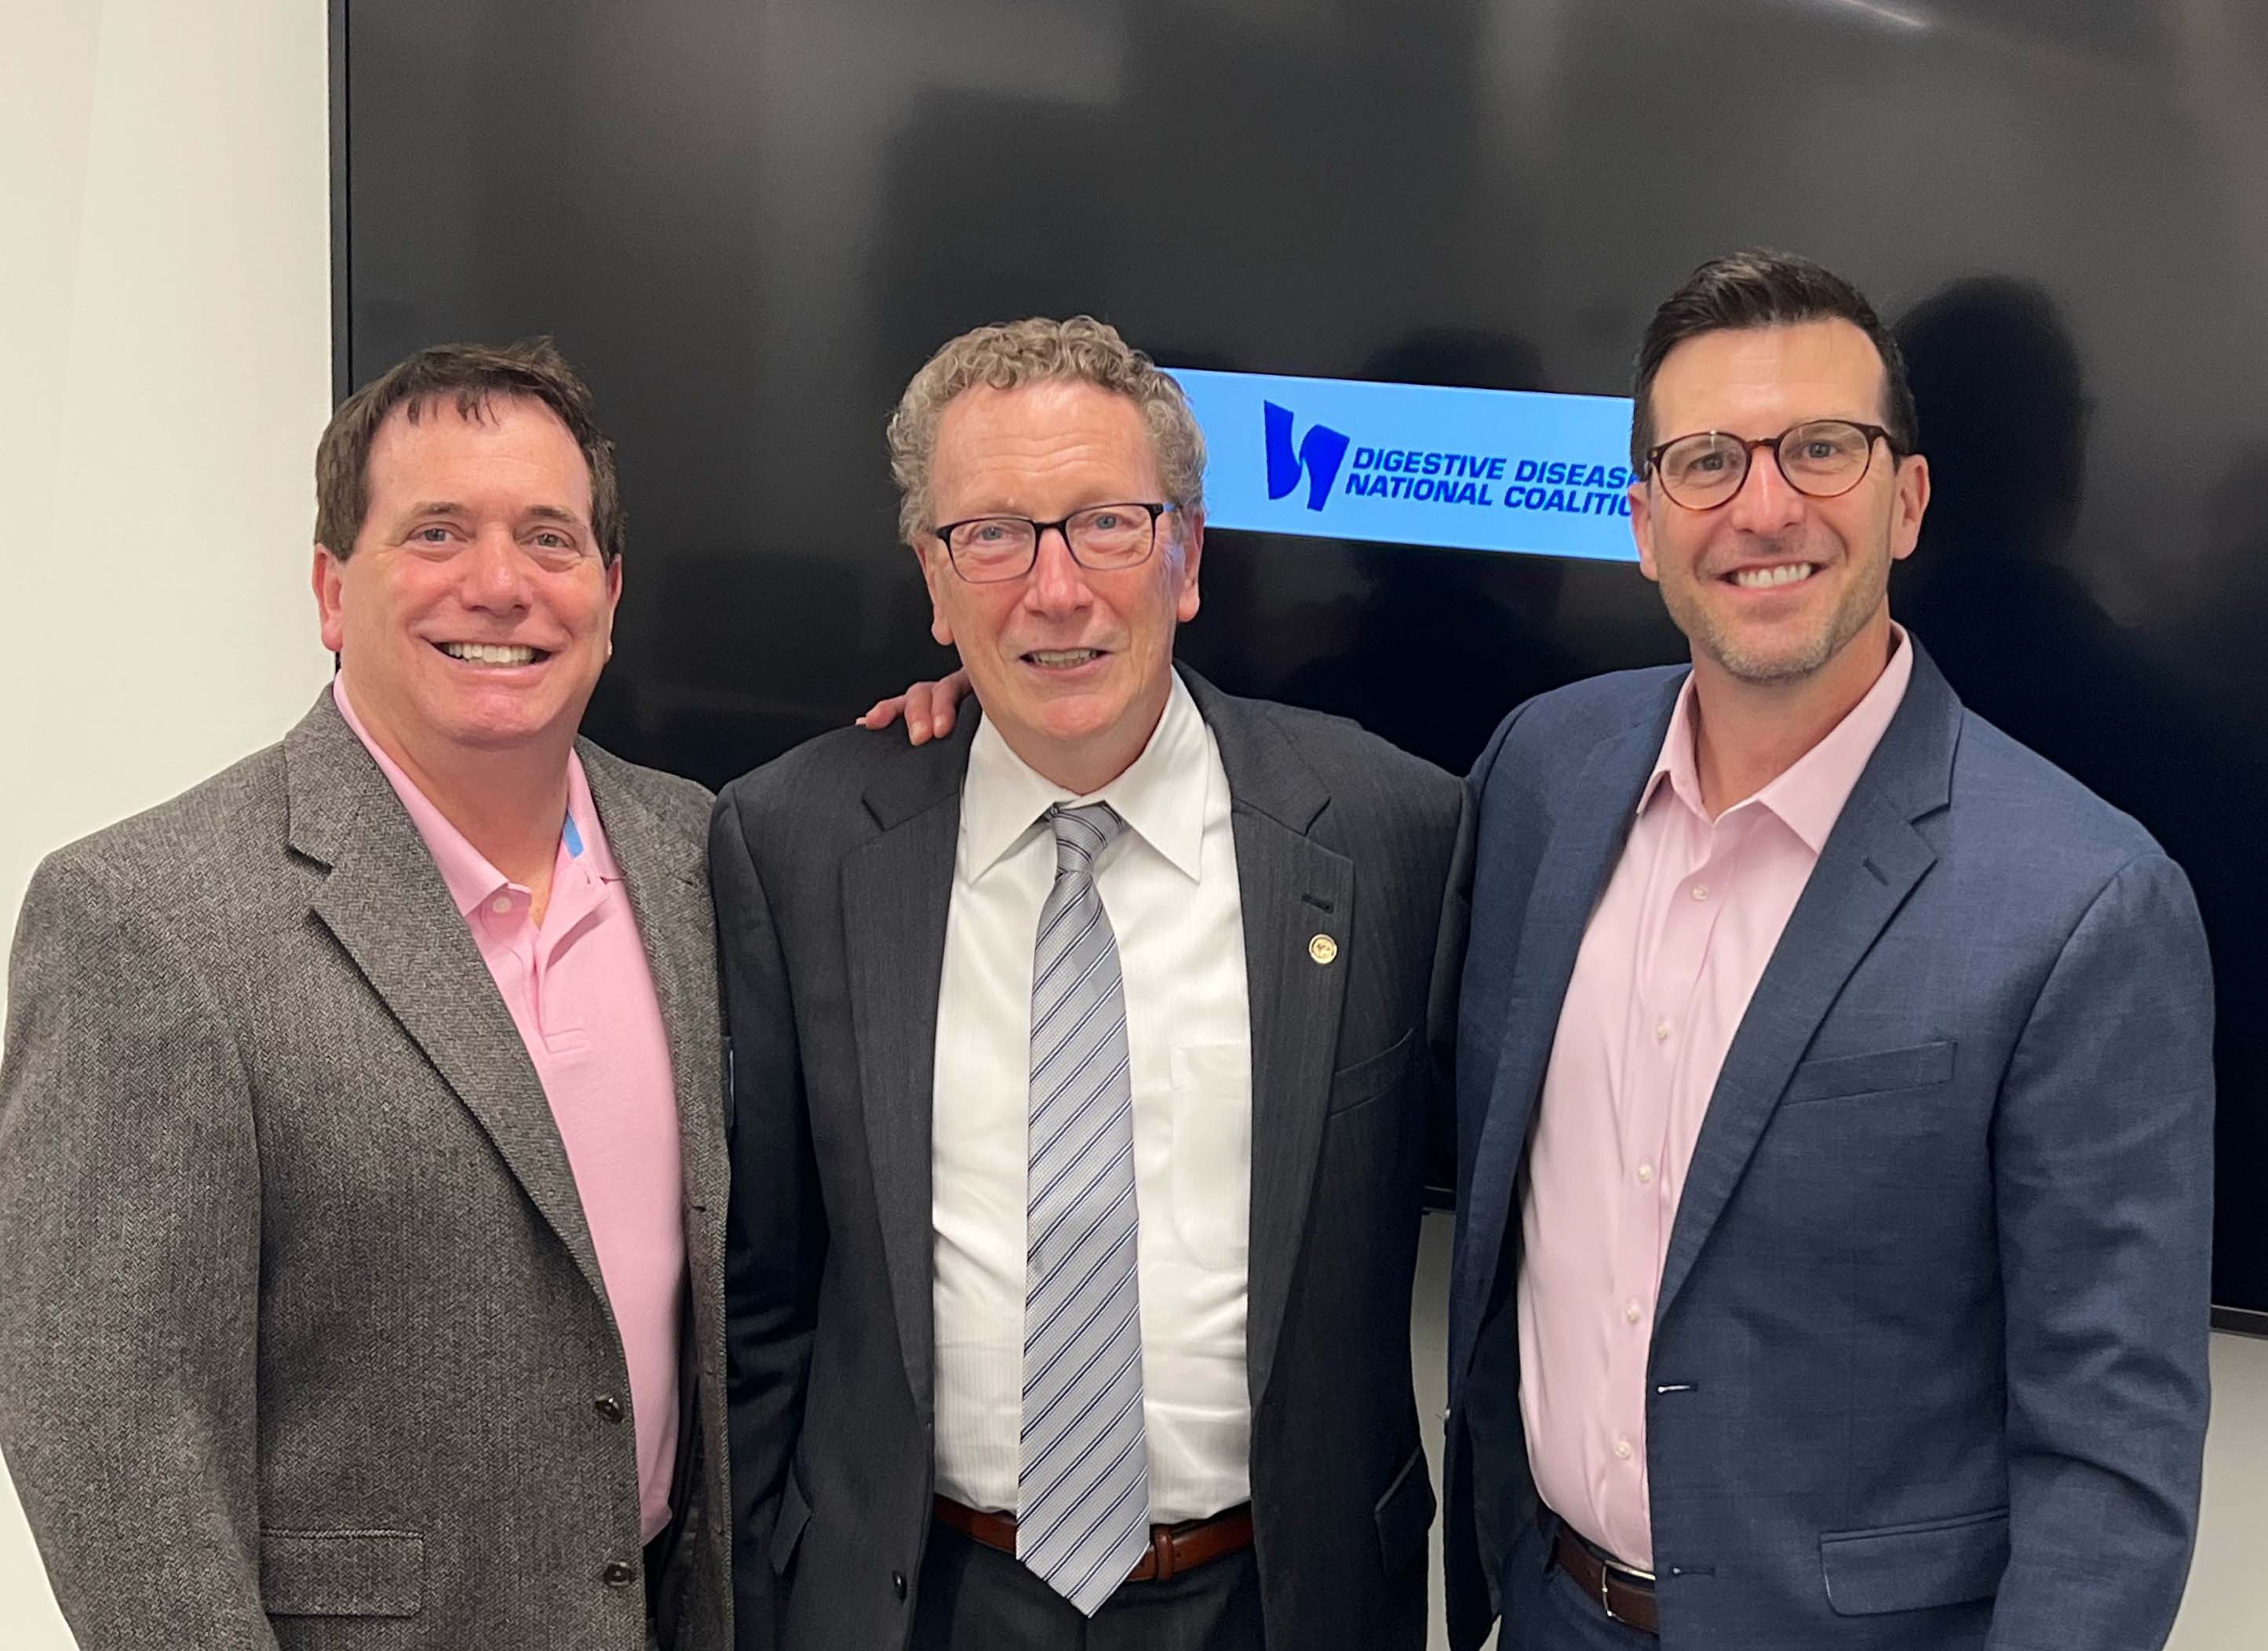 ASBM Chairman Ralph McKibbin MD; DDNC President Carrol Koscheski; and Brad Conway, VP of Legislative Affairs and Advocacy for the American College of Gastroenterology were among the physicians who met with lawmakers on PBM reform and other issues.